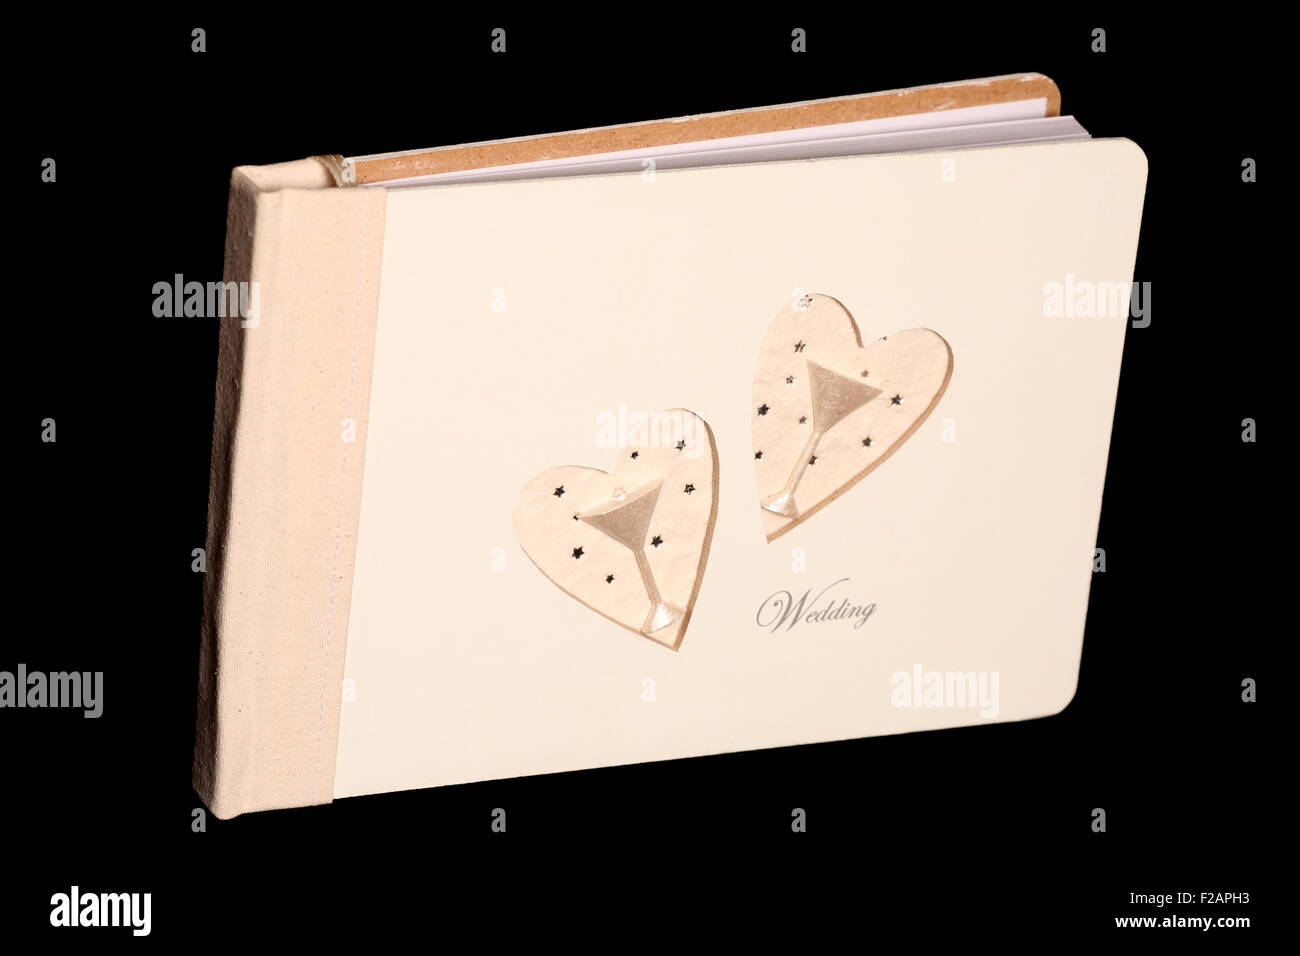 wedding guest book on black background Stock Photo